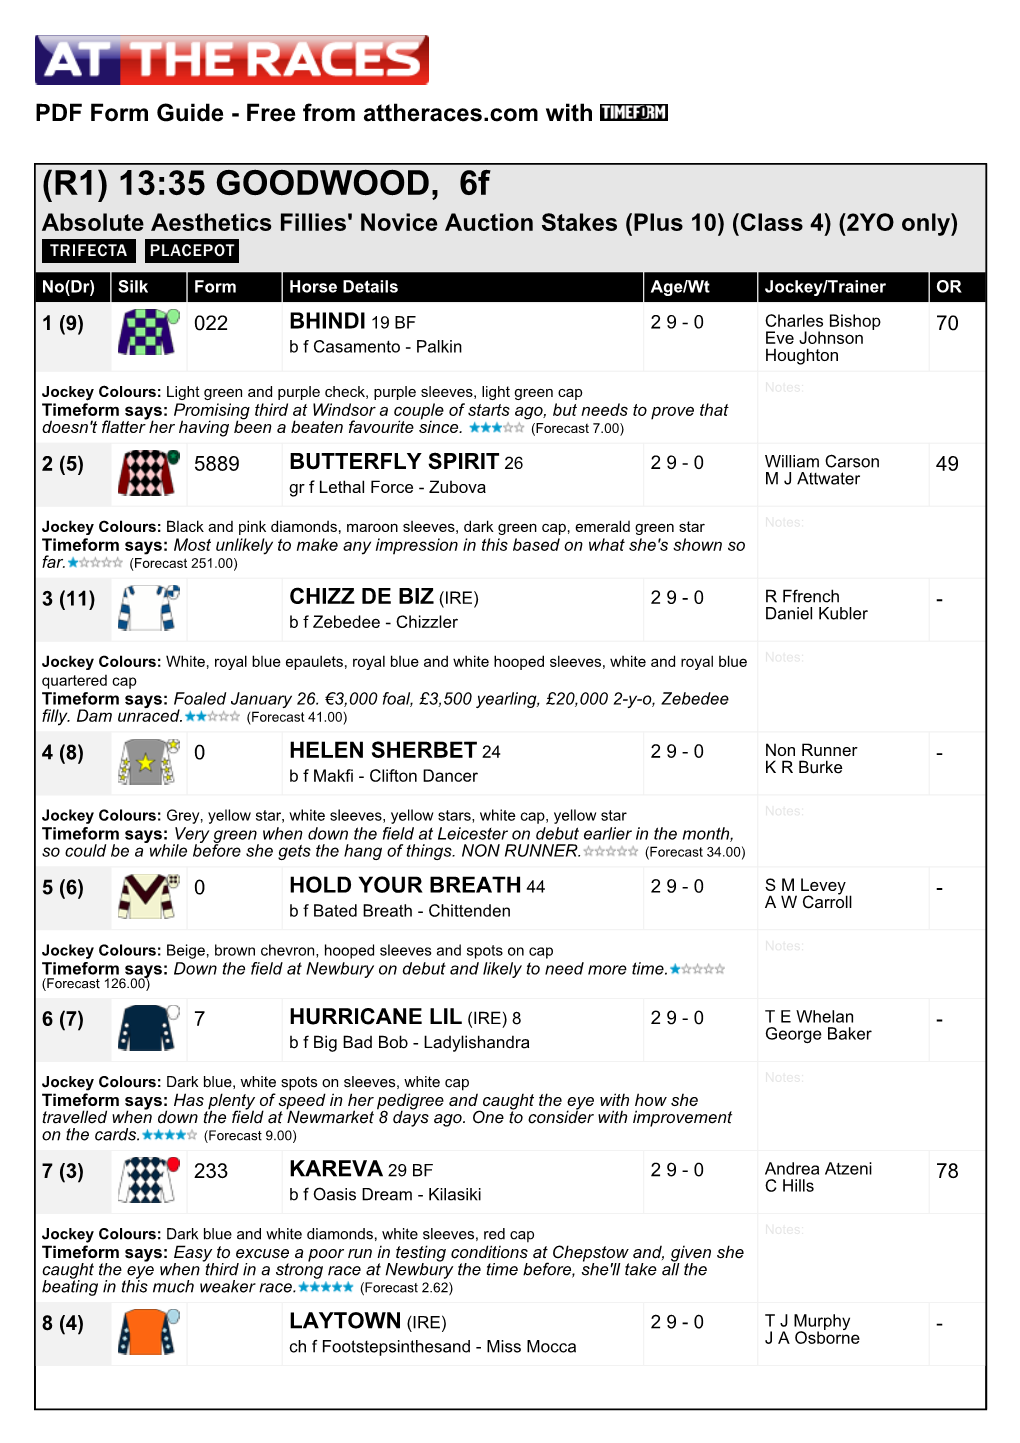 13:35 GOODWOOD, 6F Absolute Aesthetics Fillies' Novice Auction Stakes (Plus 10) (Class 4) (2YO Only)